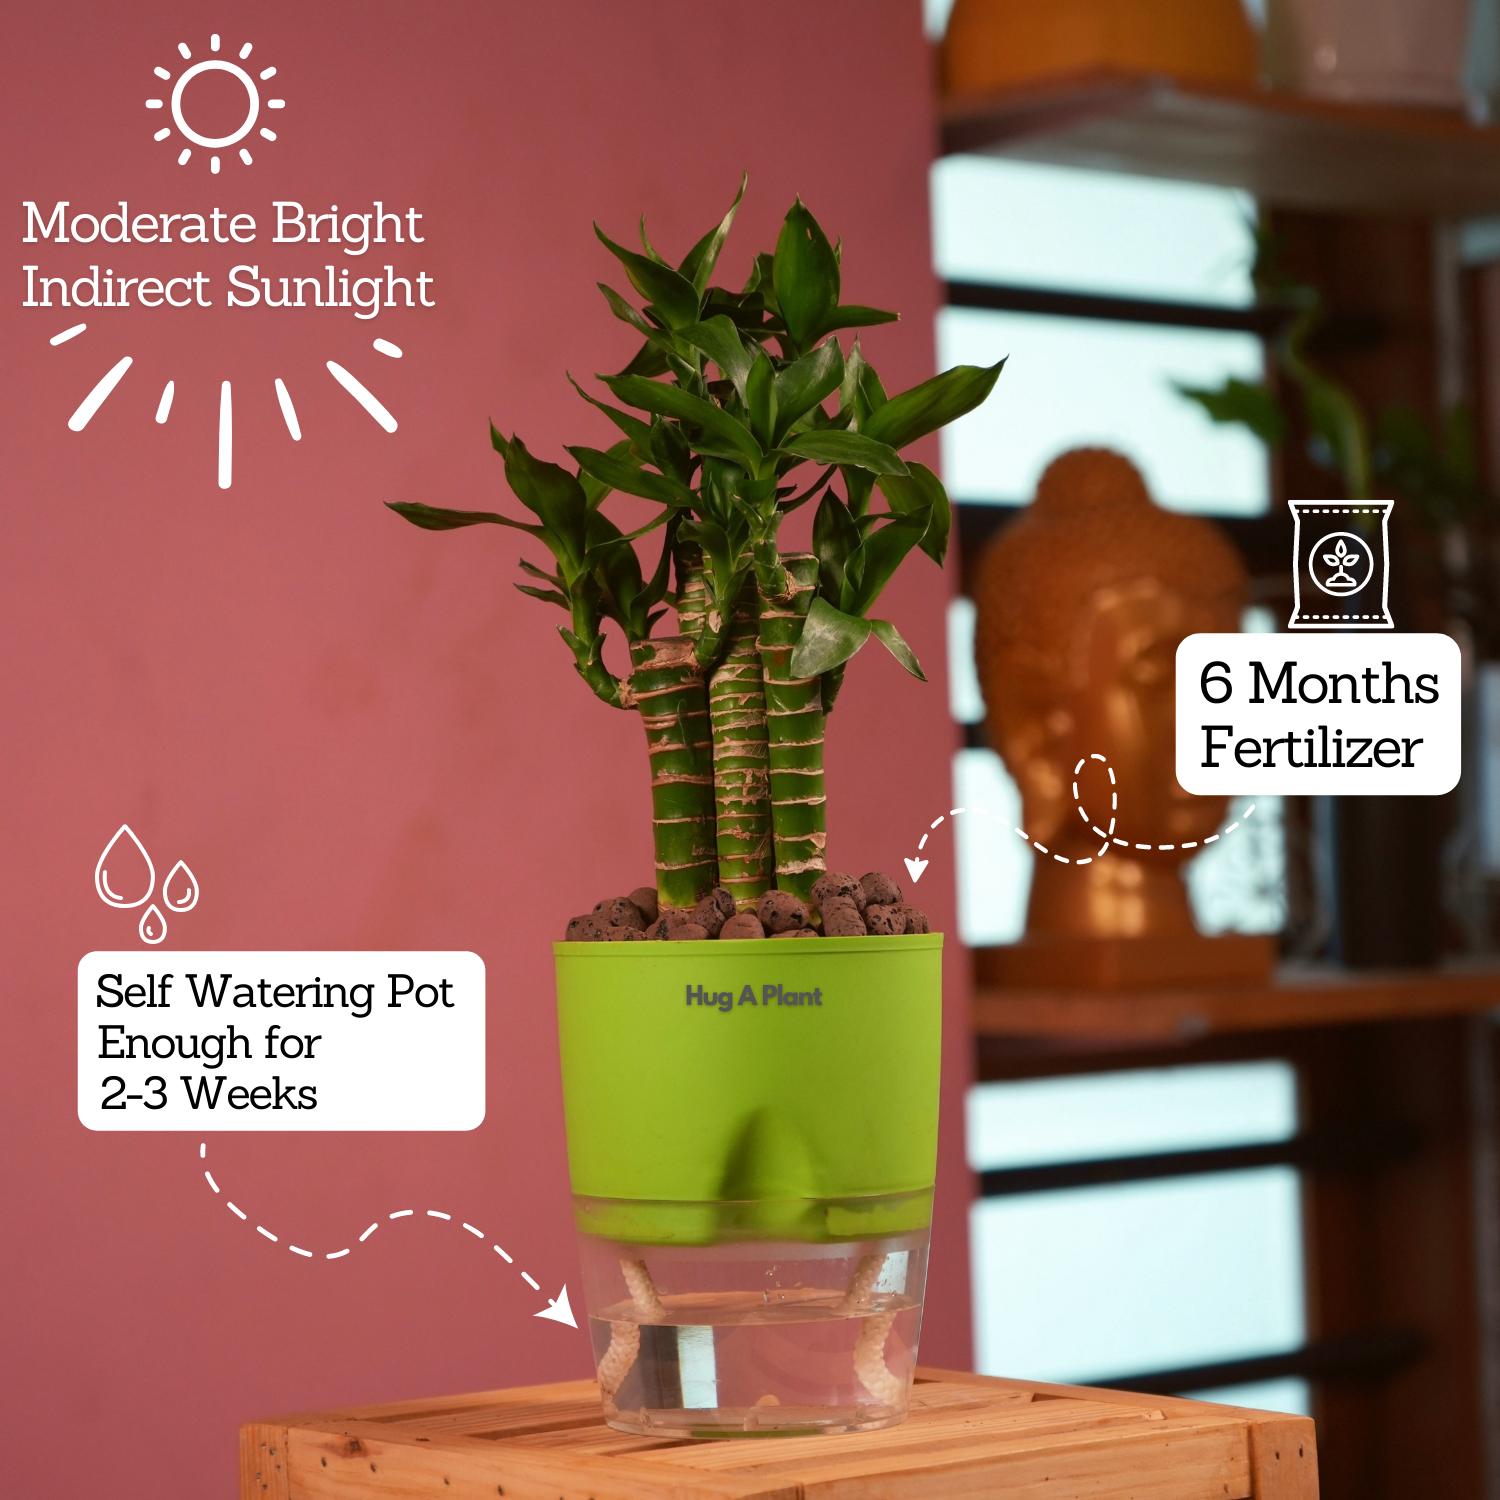 Lotus Bamboo / Lucky Bamboo - Live Plant (With Self-Watering Pot & Plant)